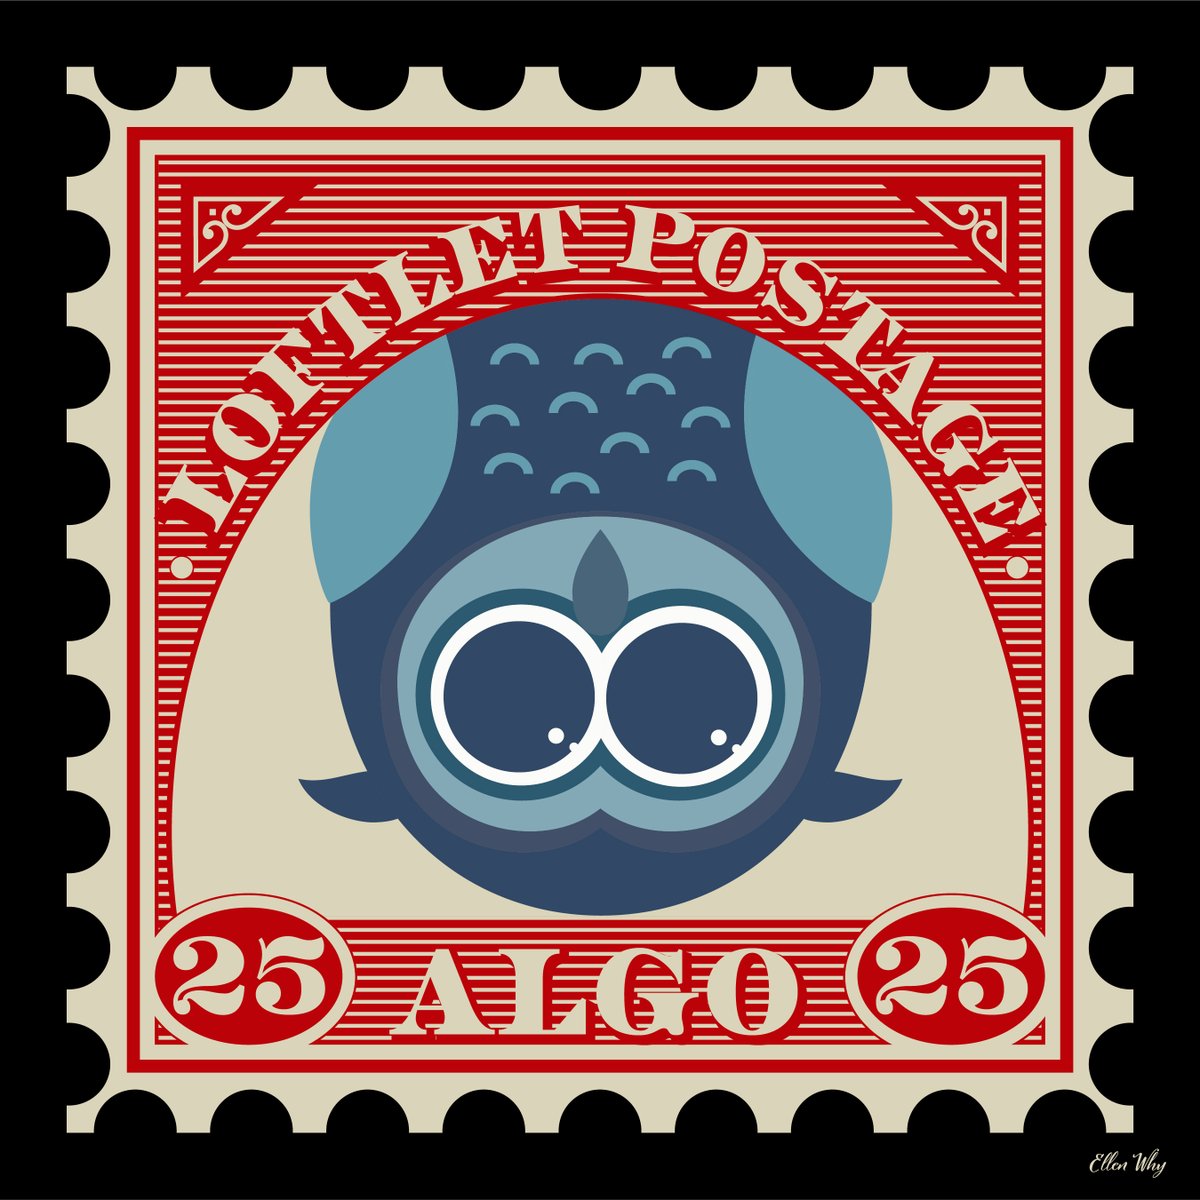 SNEAK PEEK: We got talking about how a mistake can become something amazing, and I wanted to pay homage to that with this drop. This Loftlet is based on the Inverted Jenny, a stamp with an upside down airplane. That mistake is now worth over a million dollars. Pretty crazy! https://t.co/6ykGmVh6Z2